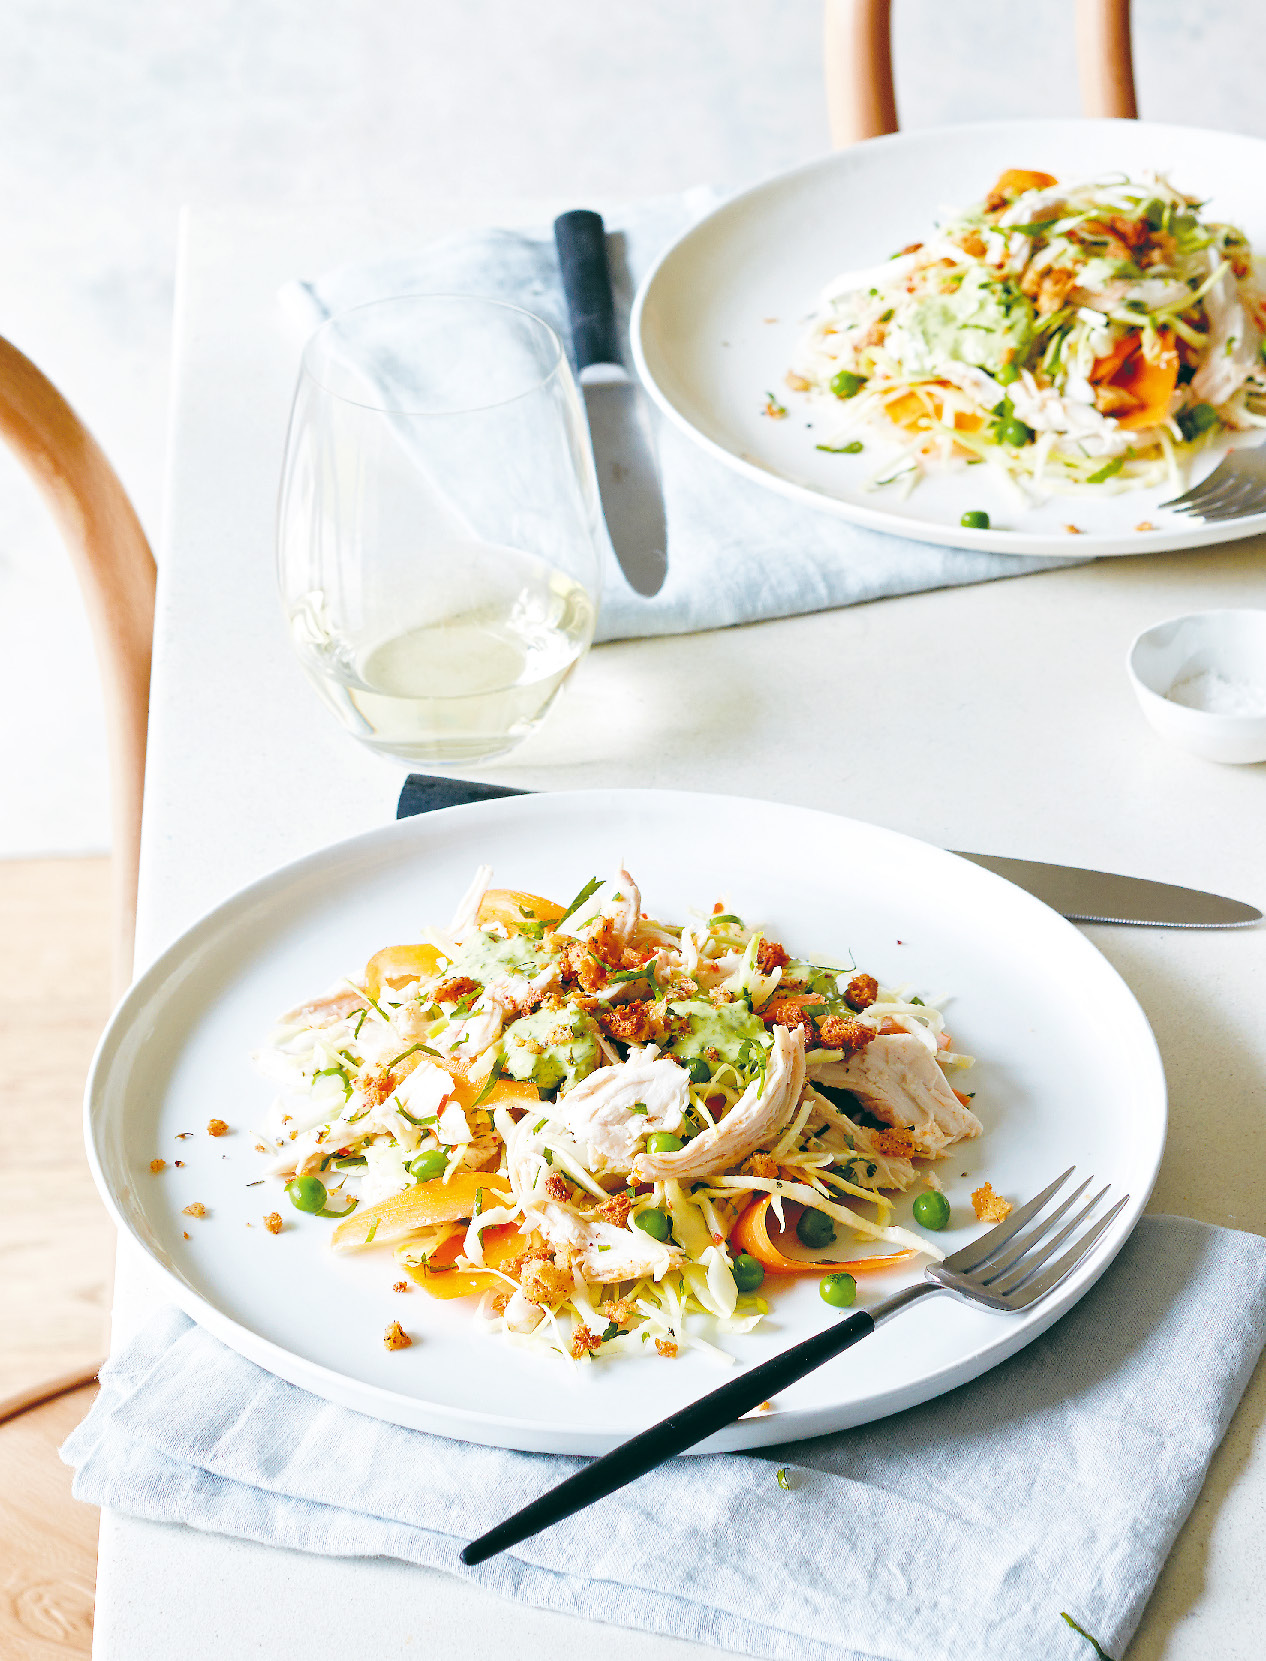 Roast chicken slaw with green goddess dressing and za'atar crumbs